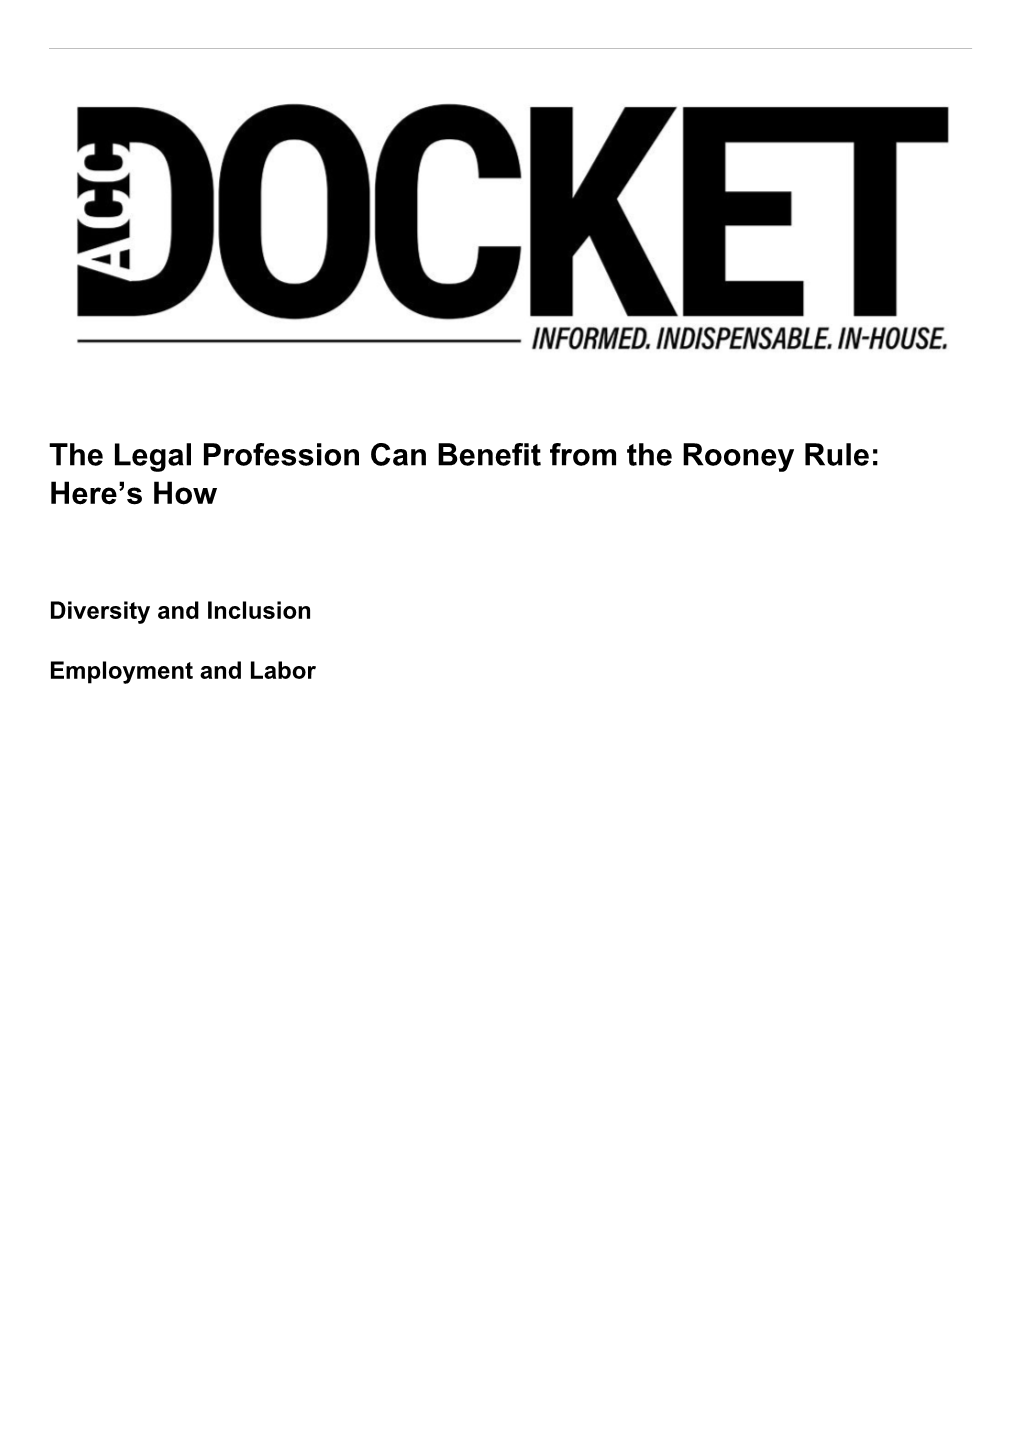 The Legal Profession Can Benefit from the Rooney Rule: Here’S How